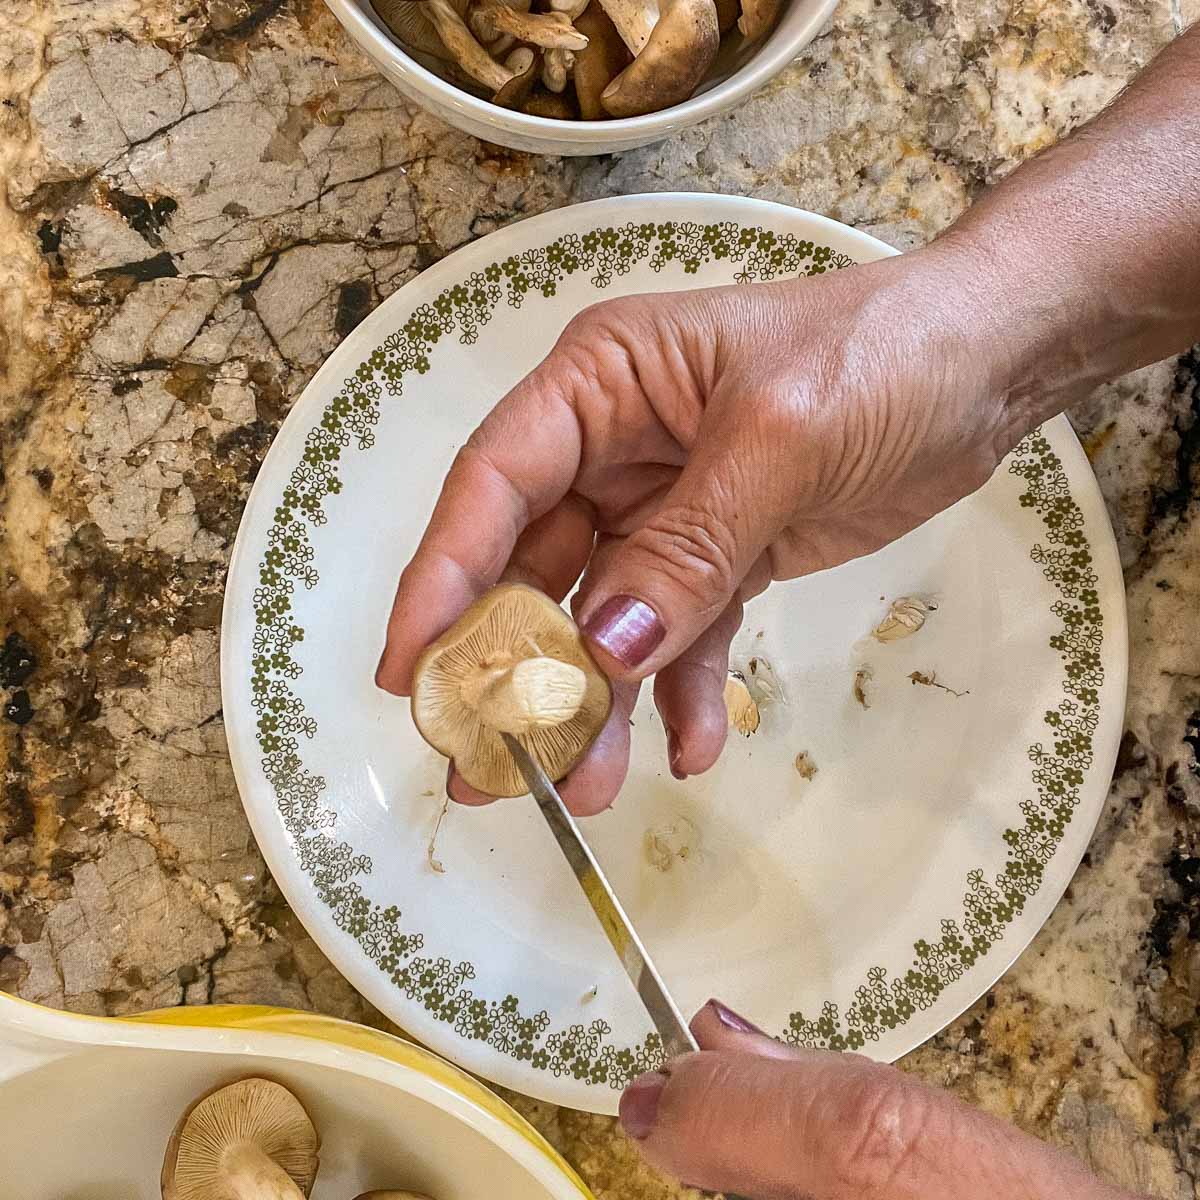 cleaning fried chicken mushrooms